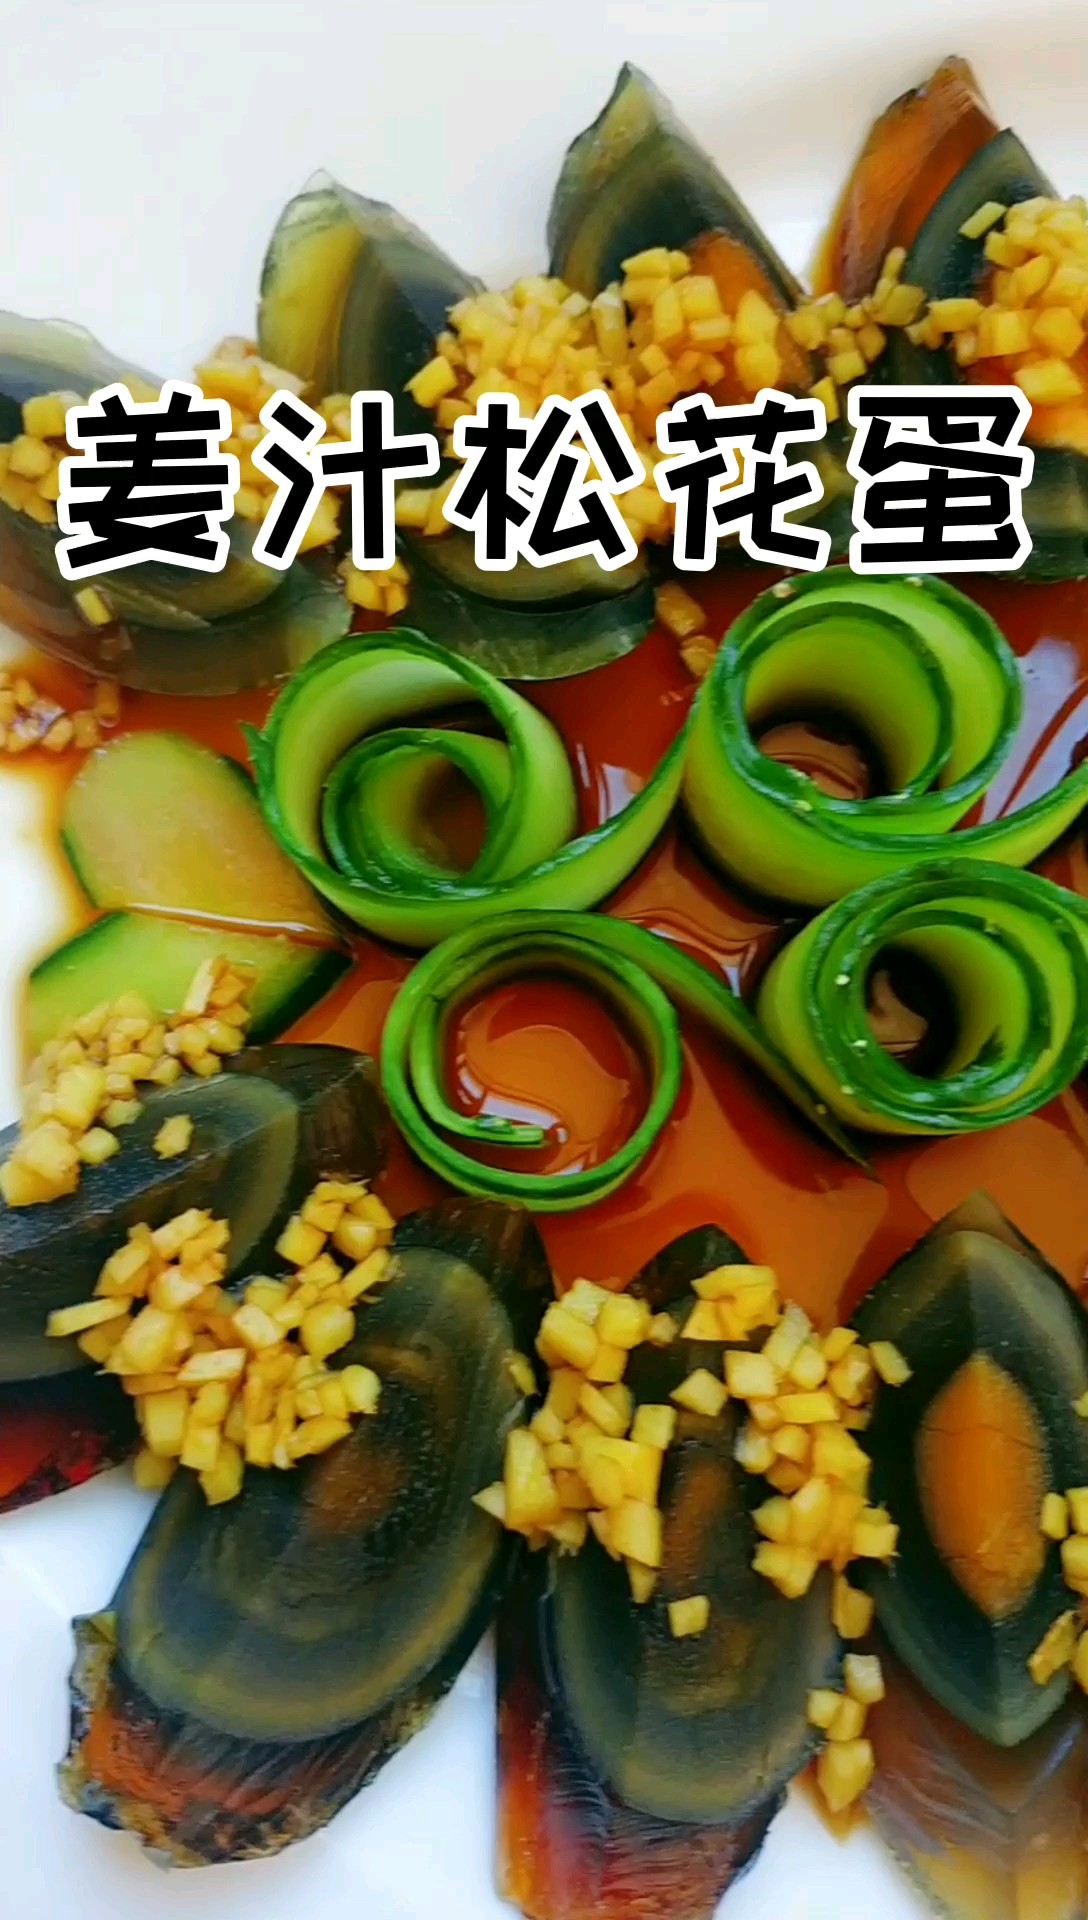 Songhua Eggs with Sauce recipe